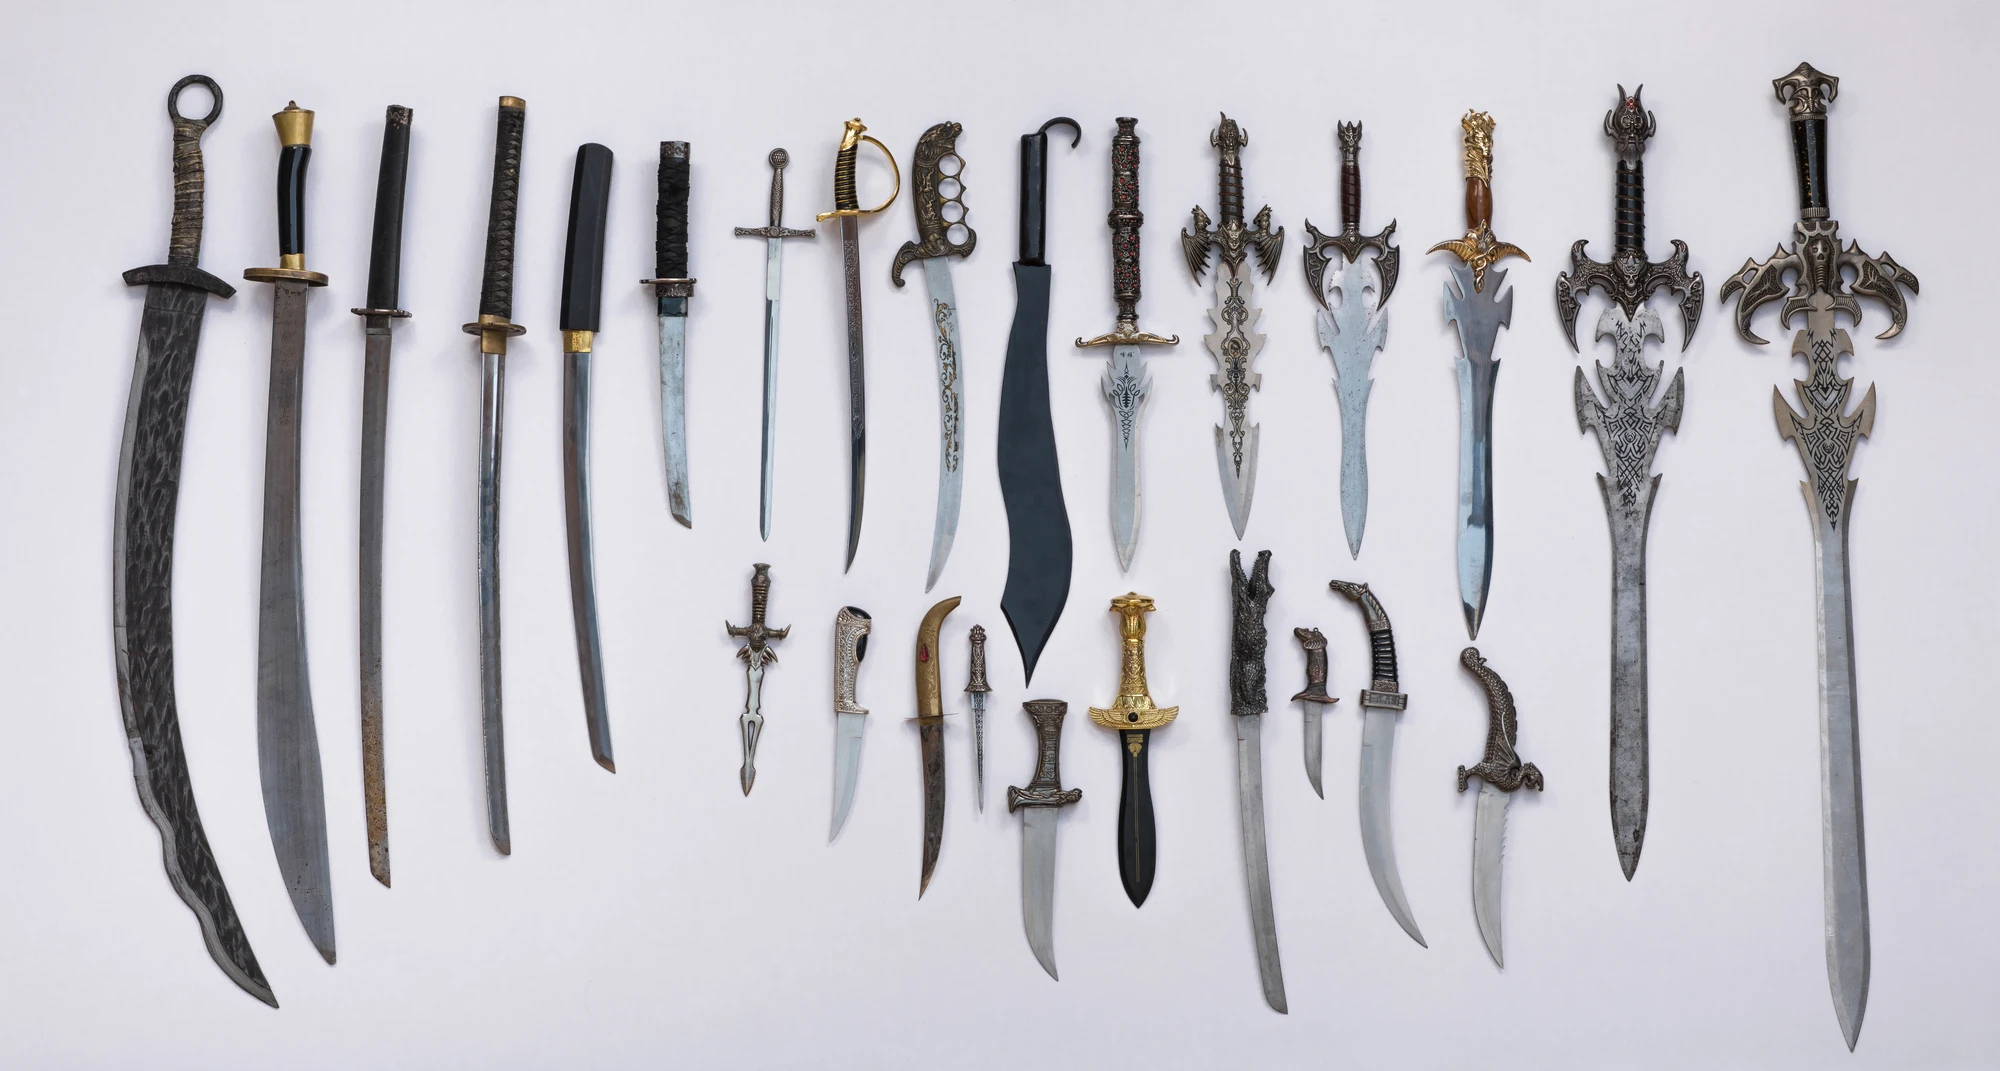 Fantasy and historical sword collection.